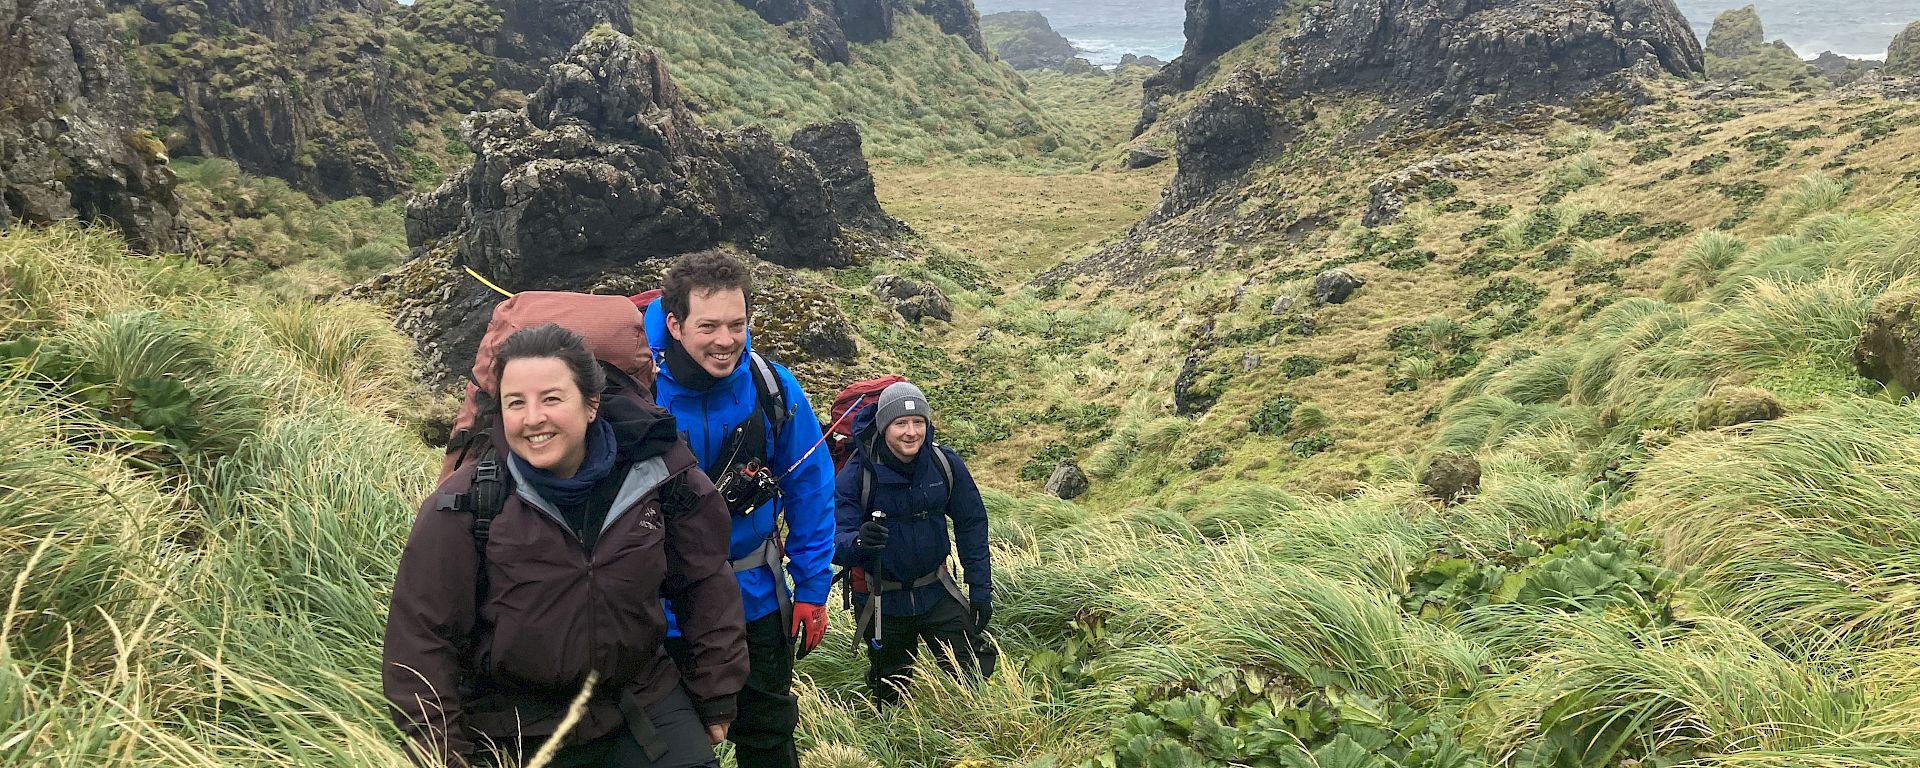 A small group of expeditioners walk through a lush, green landscape with steep rock formations. There is a bay in the distance.